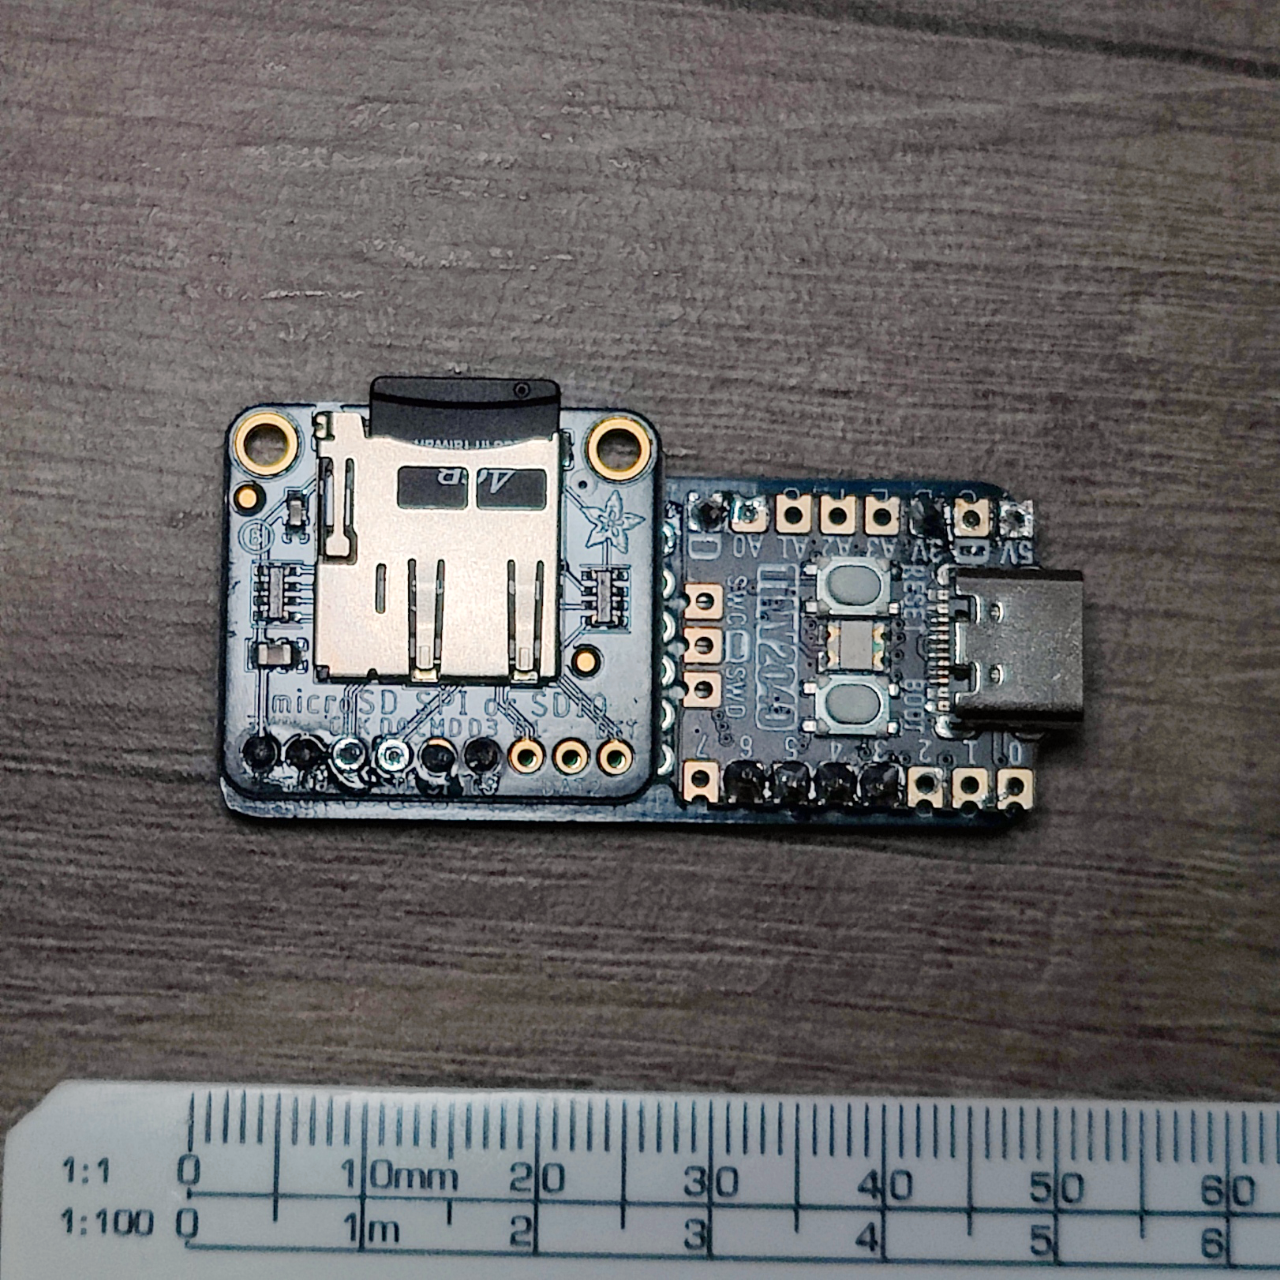 Assembled TinyCPM - Tin2040 and Micro SD card Reader, scale for scale